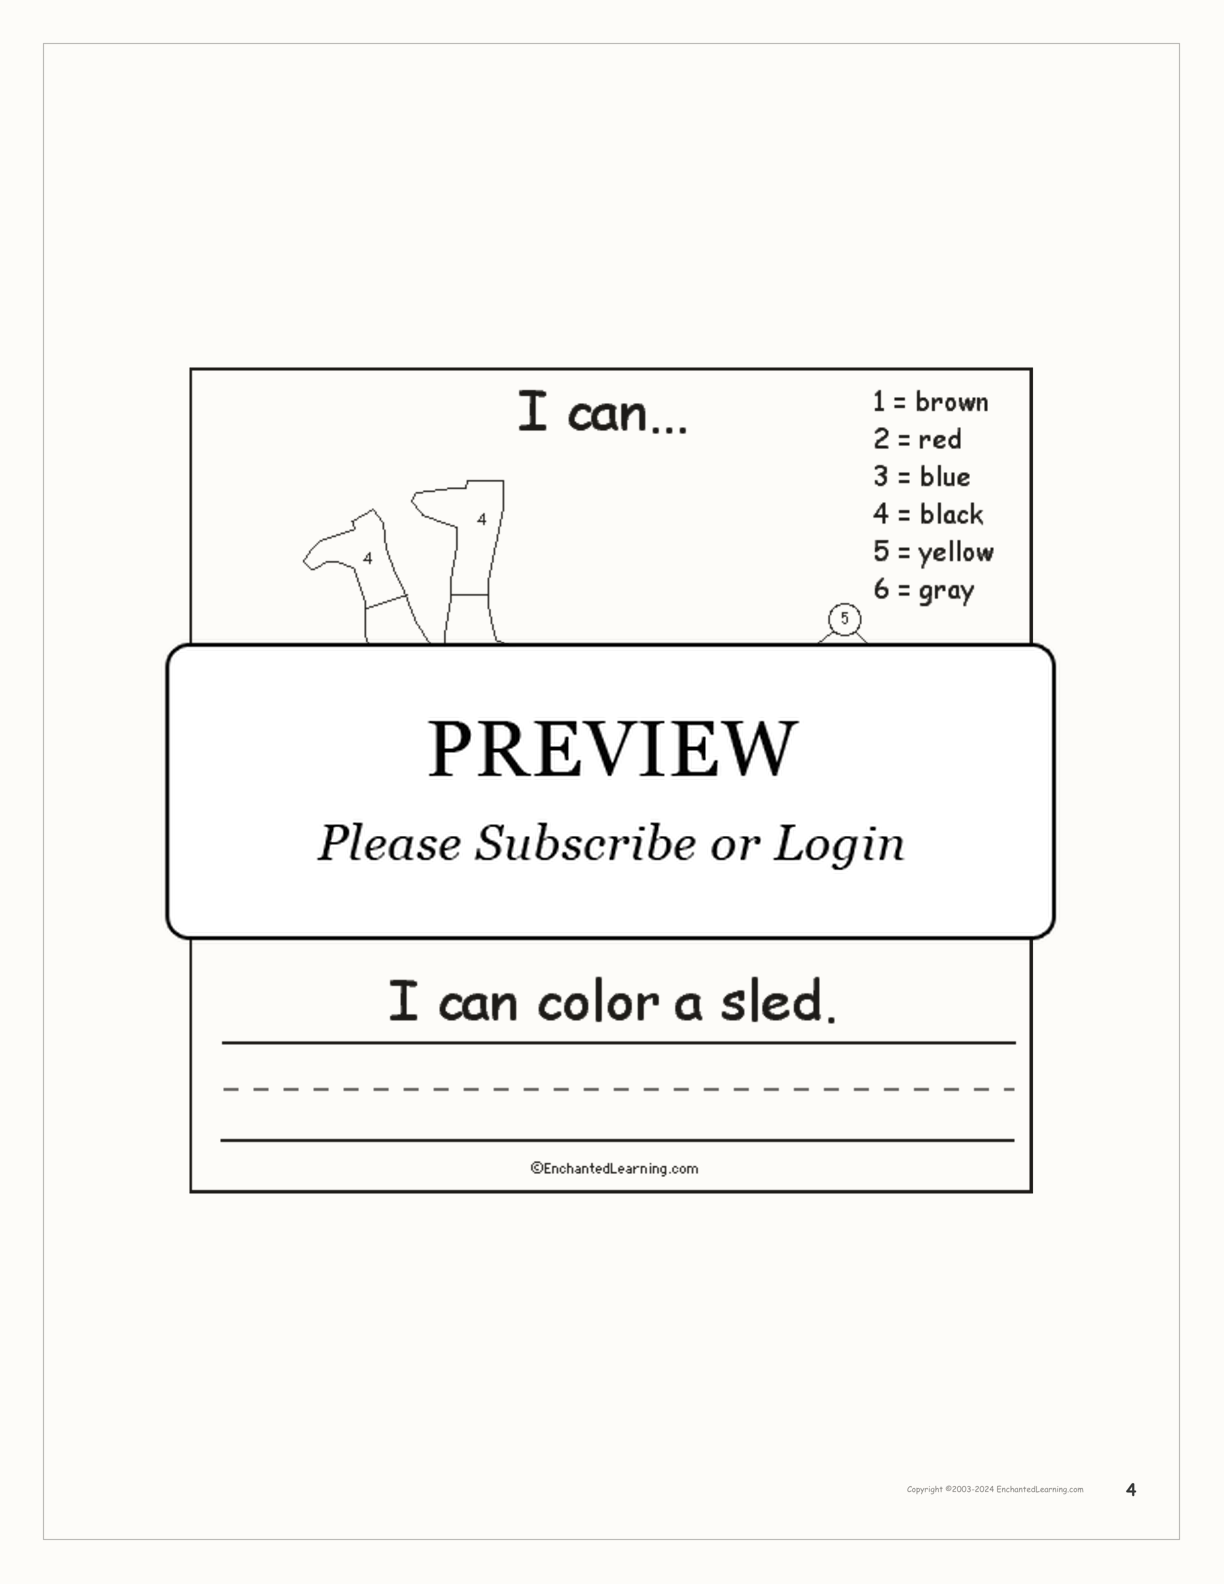 Winter I Can... Book interactive printout page 4